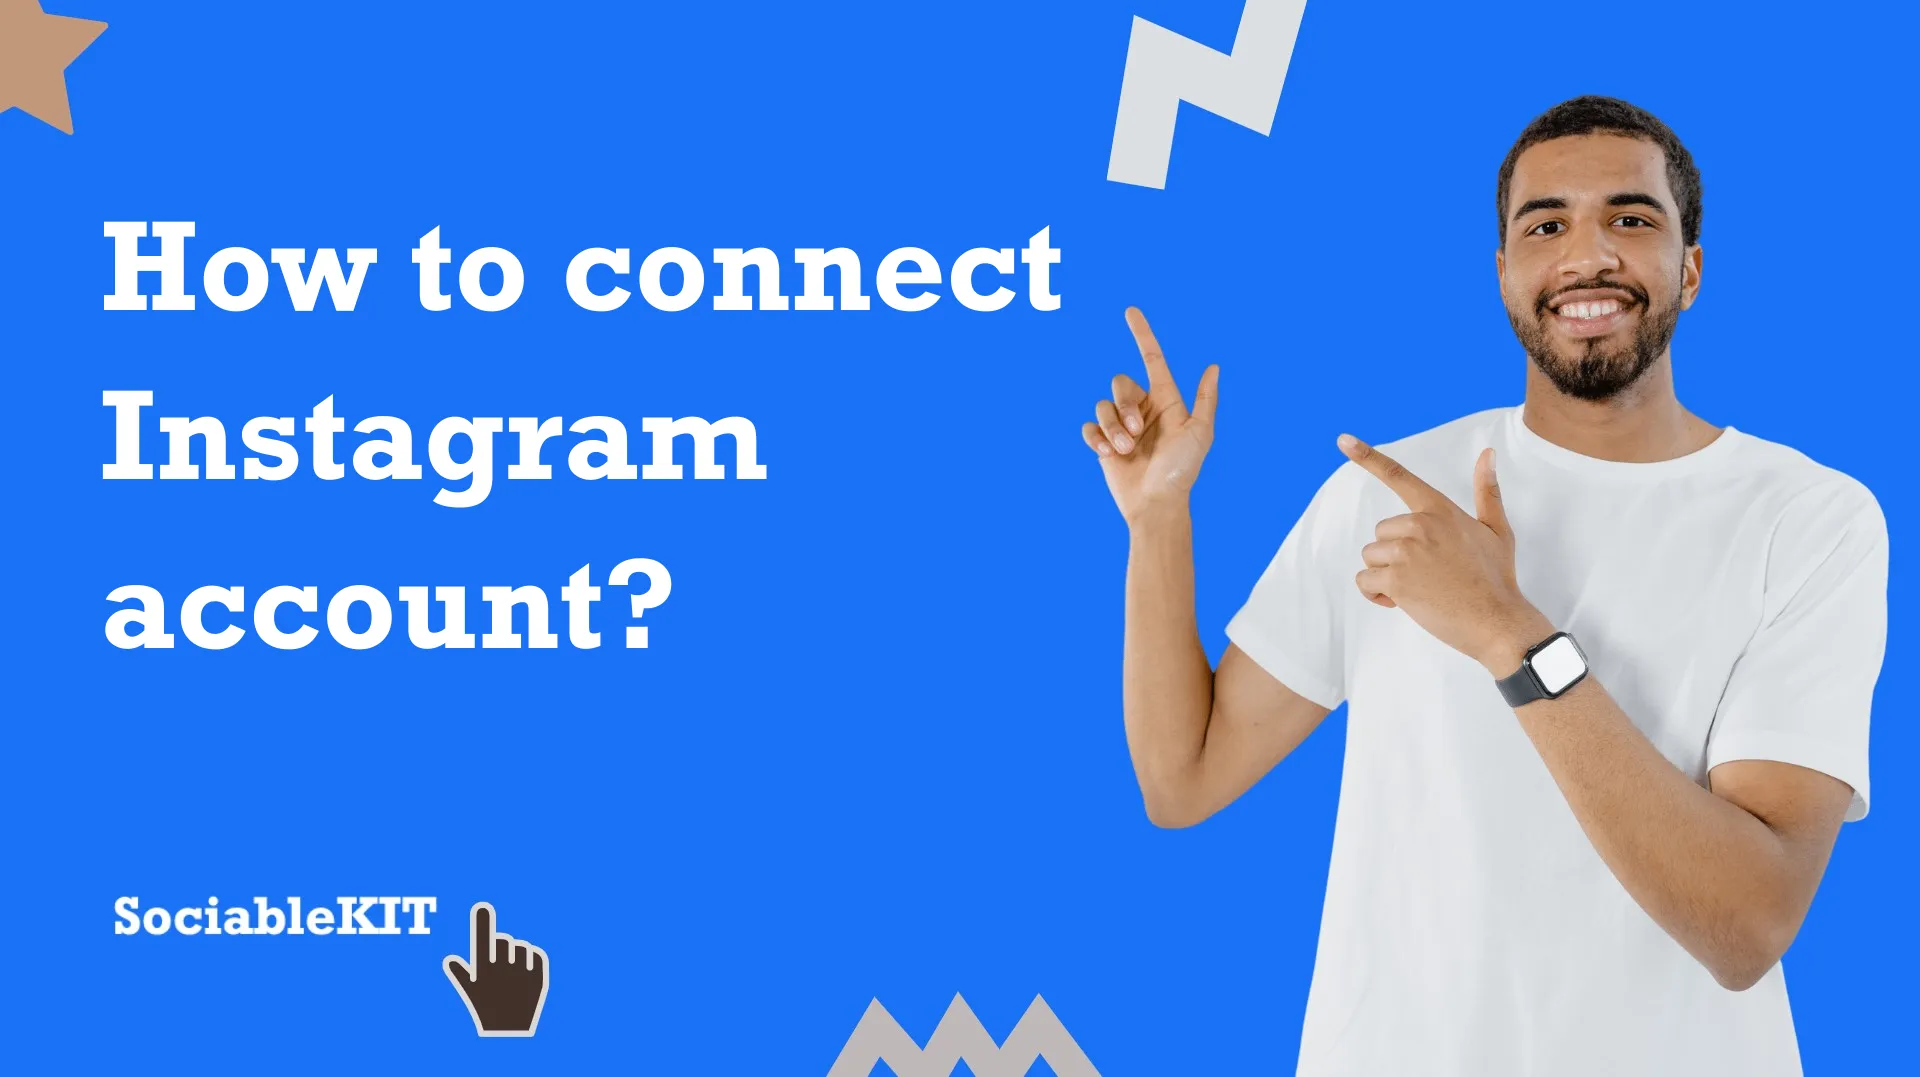 How to connect Instagram account?